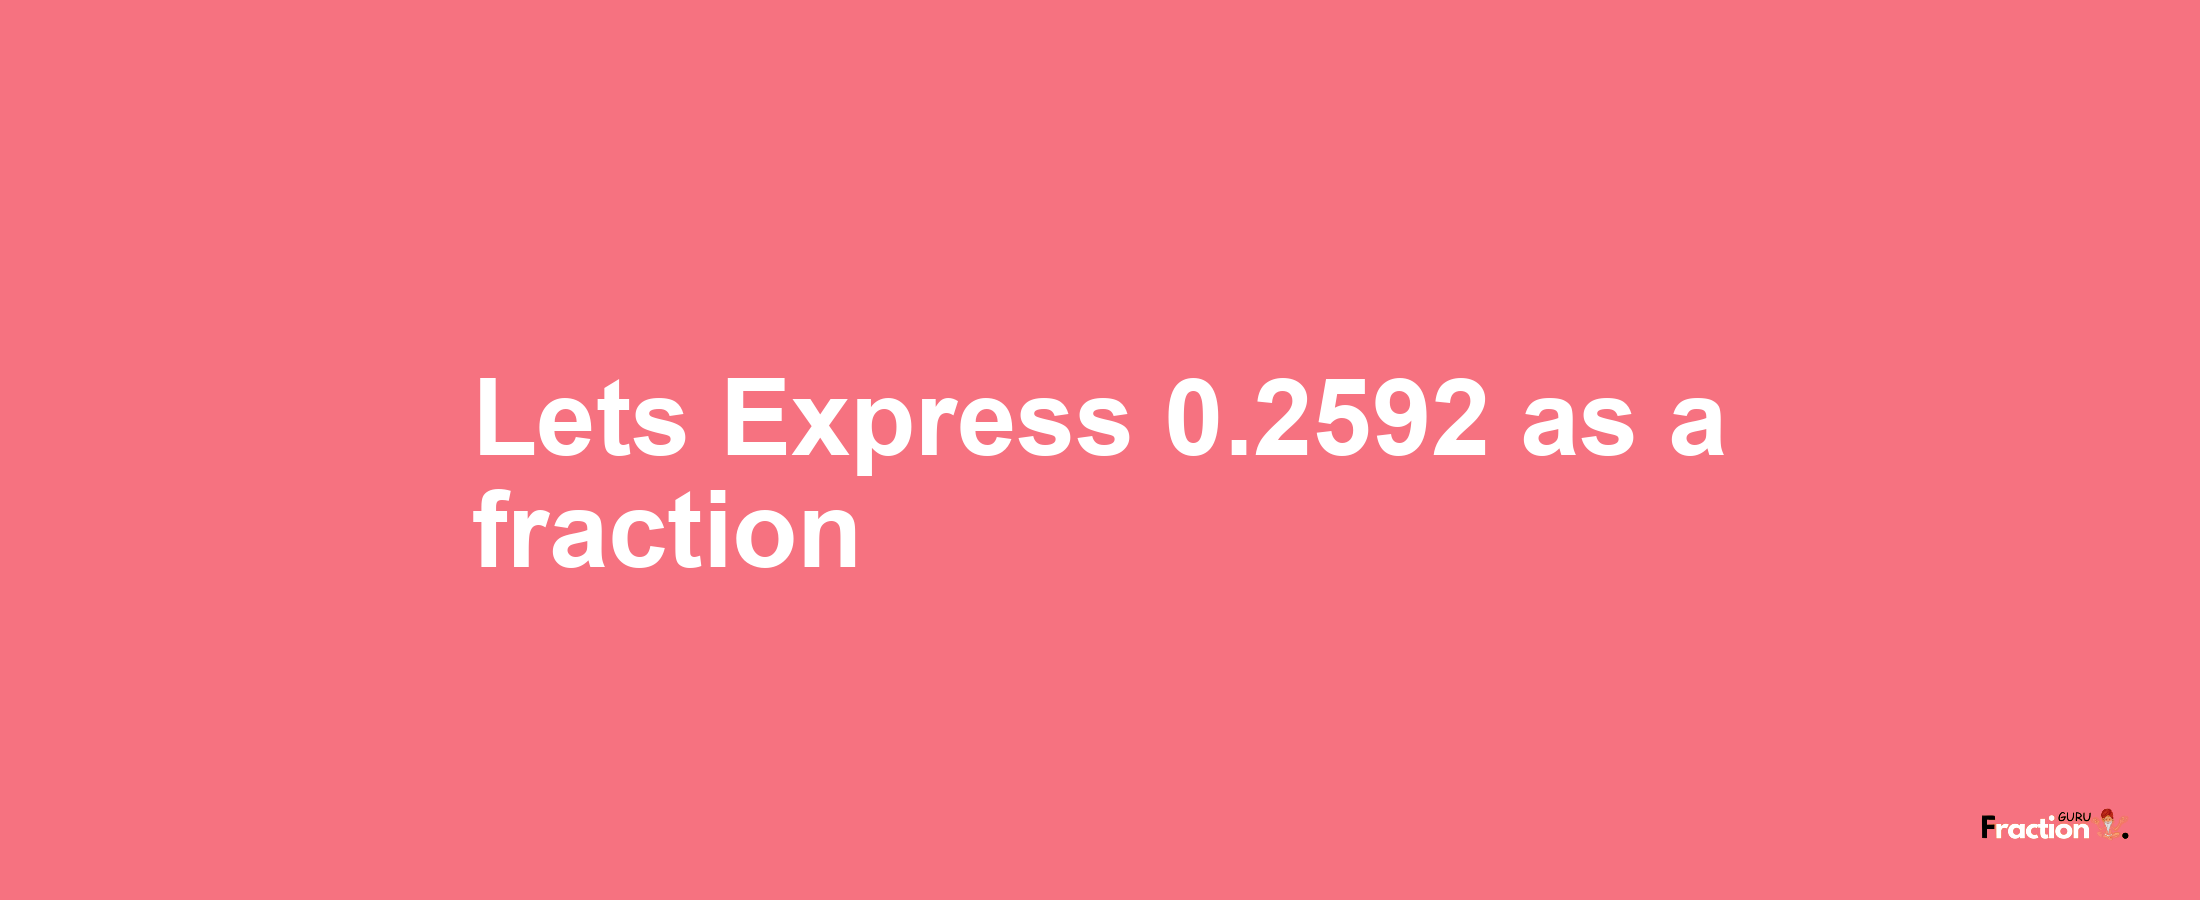 Lets Express 0.2592 as afraction